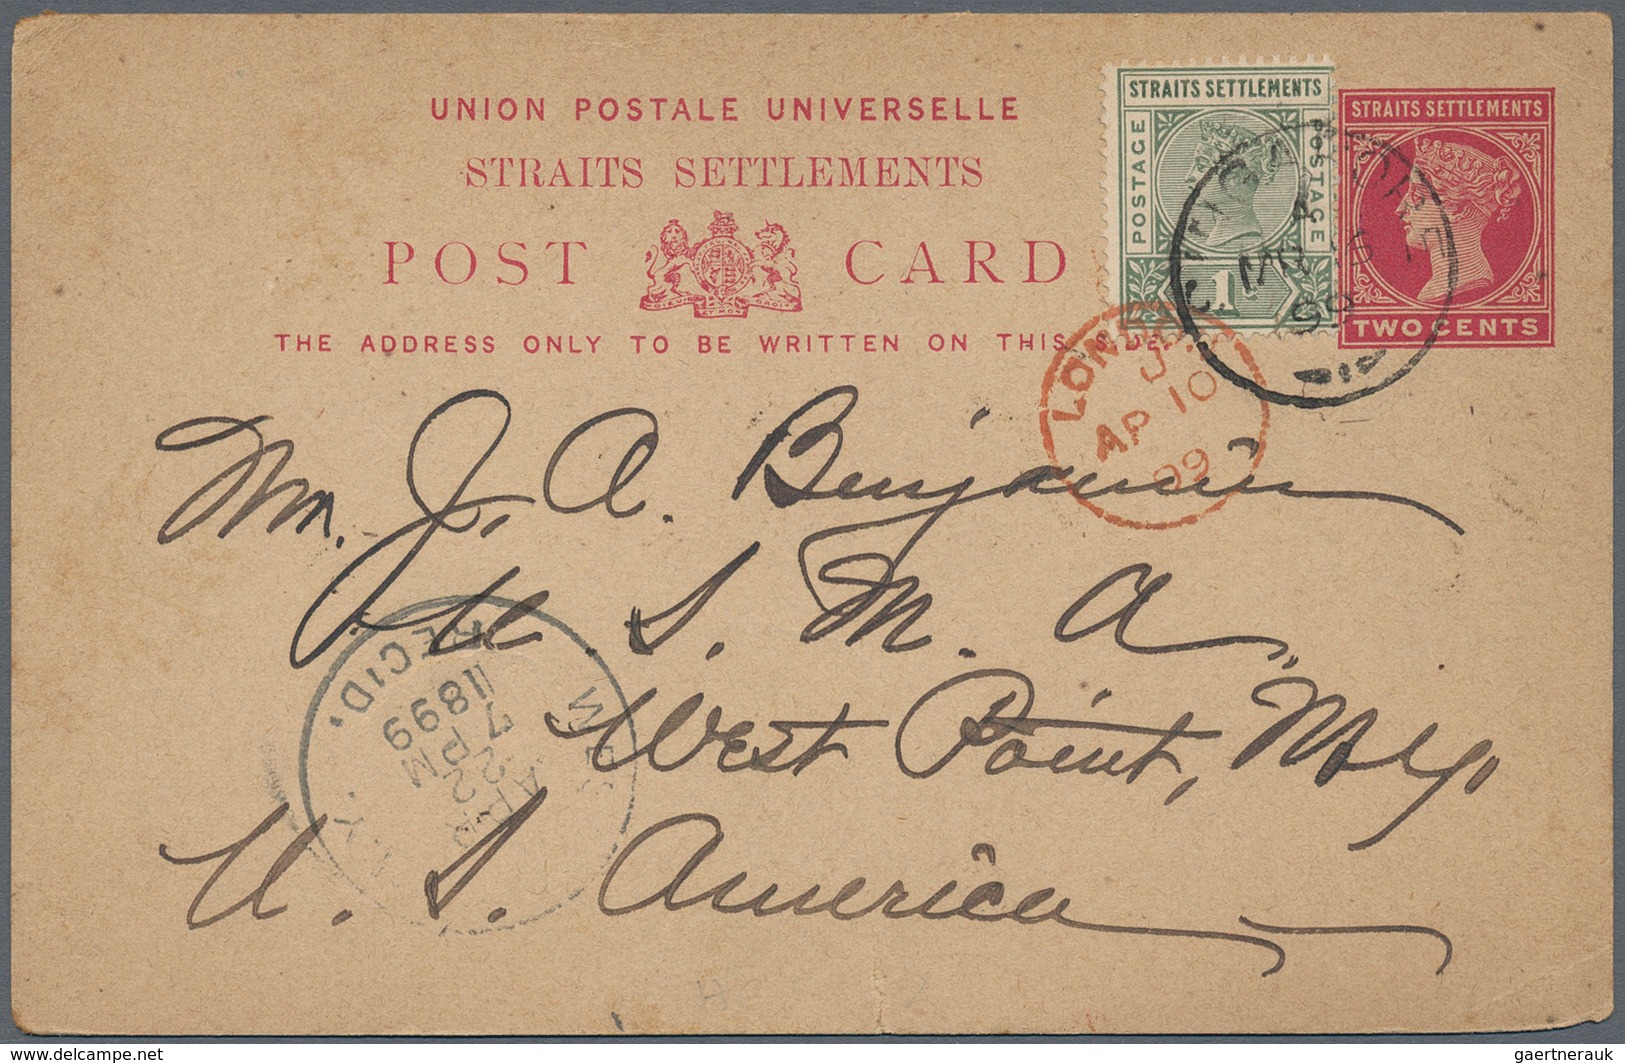 Malaiische Staaten - Straits Settlements: 1879-1940's POSTAL STATIONERY: Collection of more than 180